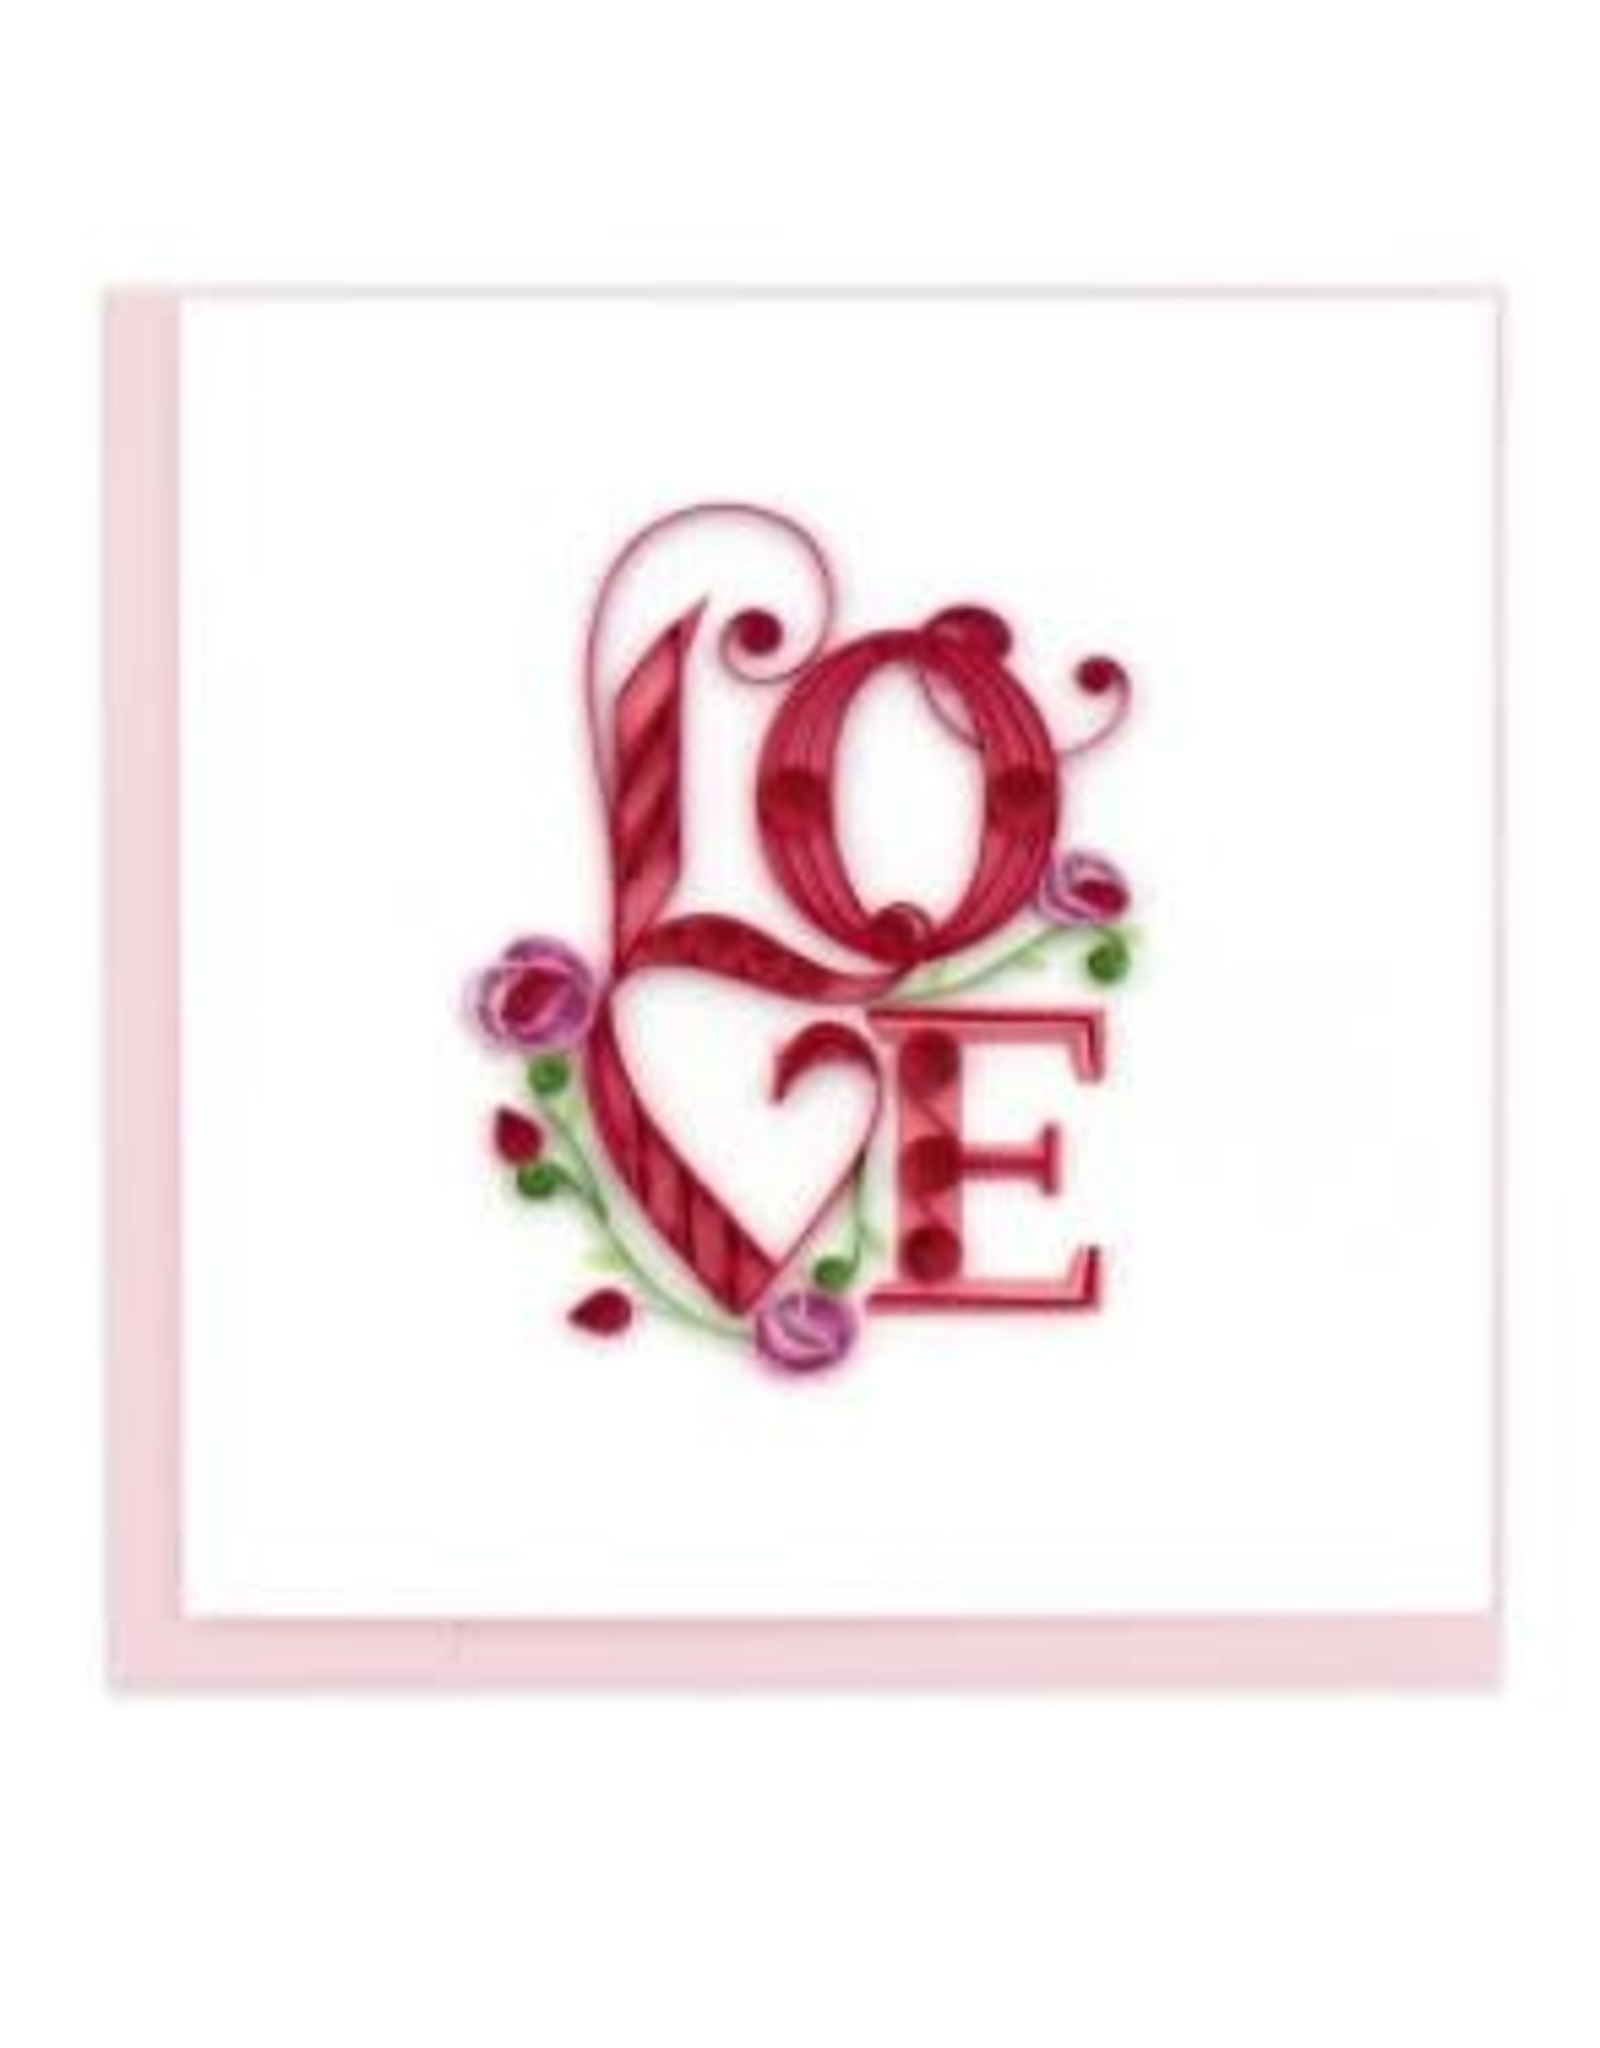 Quilling Card LG- LOVE